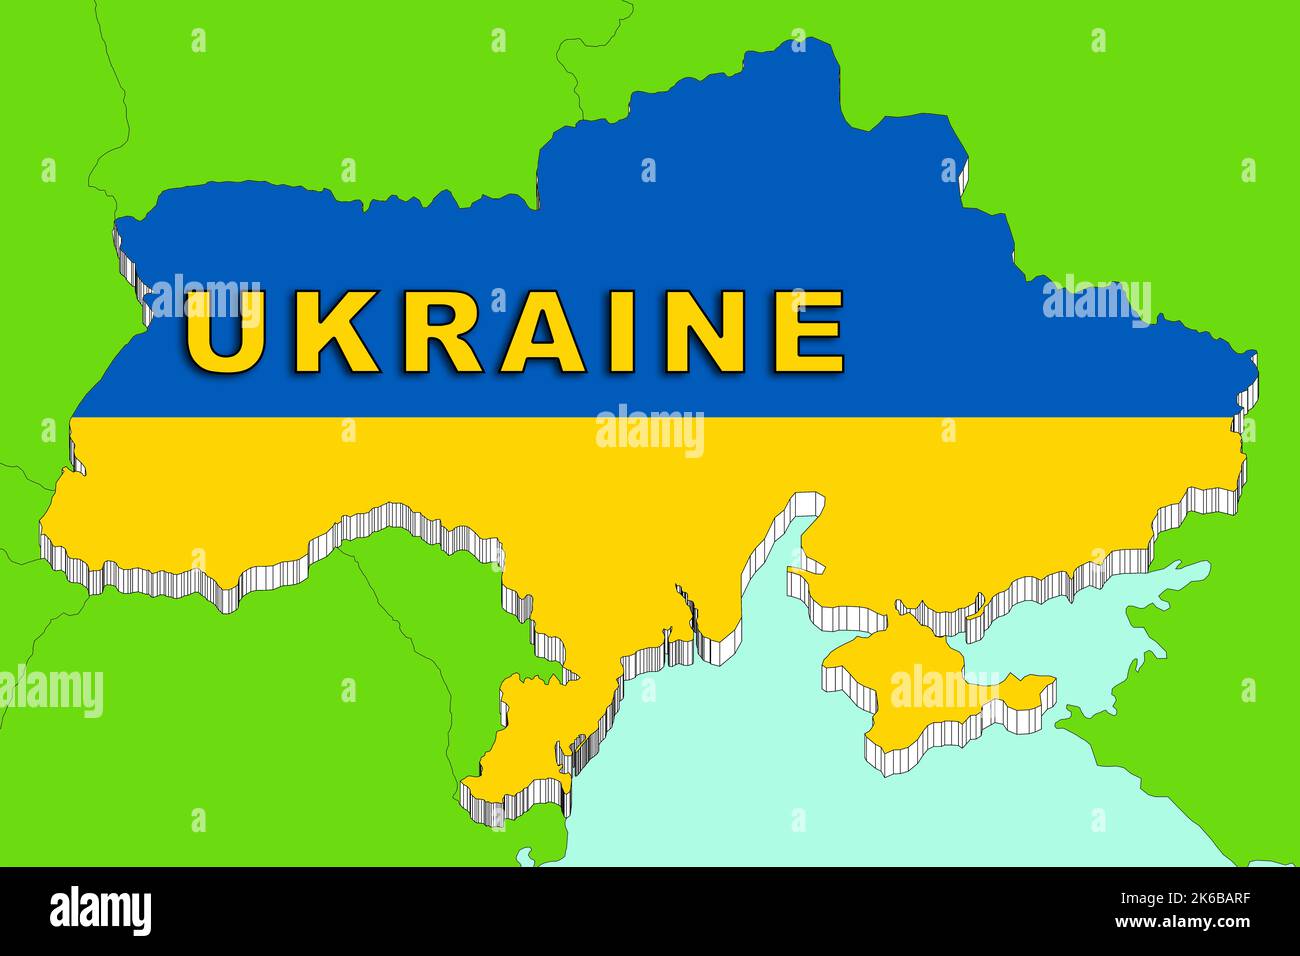 ukraine: map with borders in 3d three-dimensional form and with the colors of the yellow and blue flag. It borders the european union and Russia Stock Photo